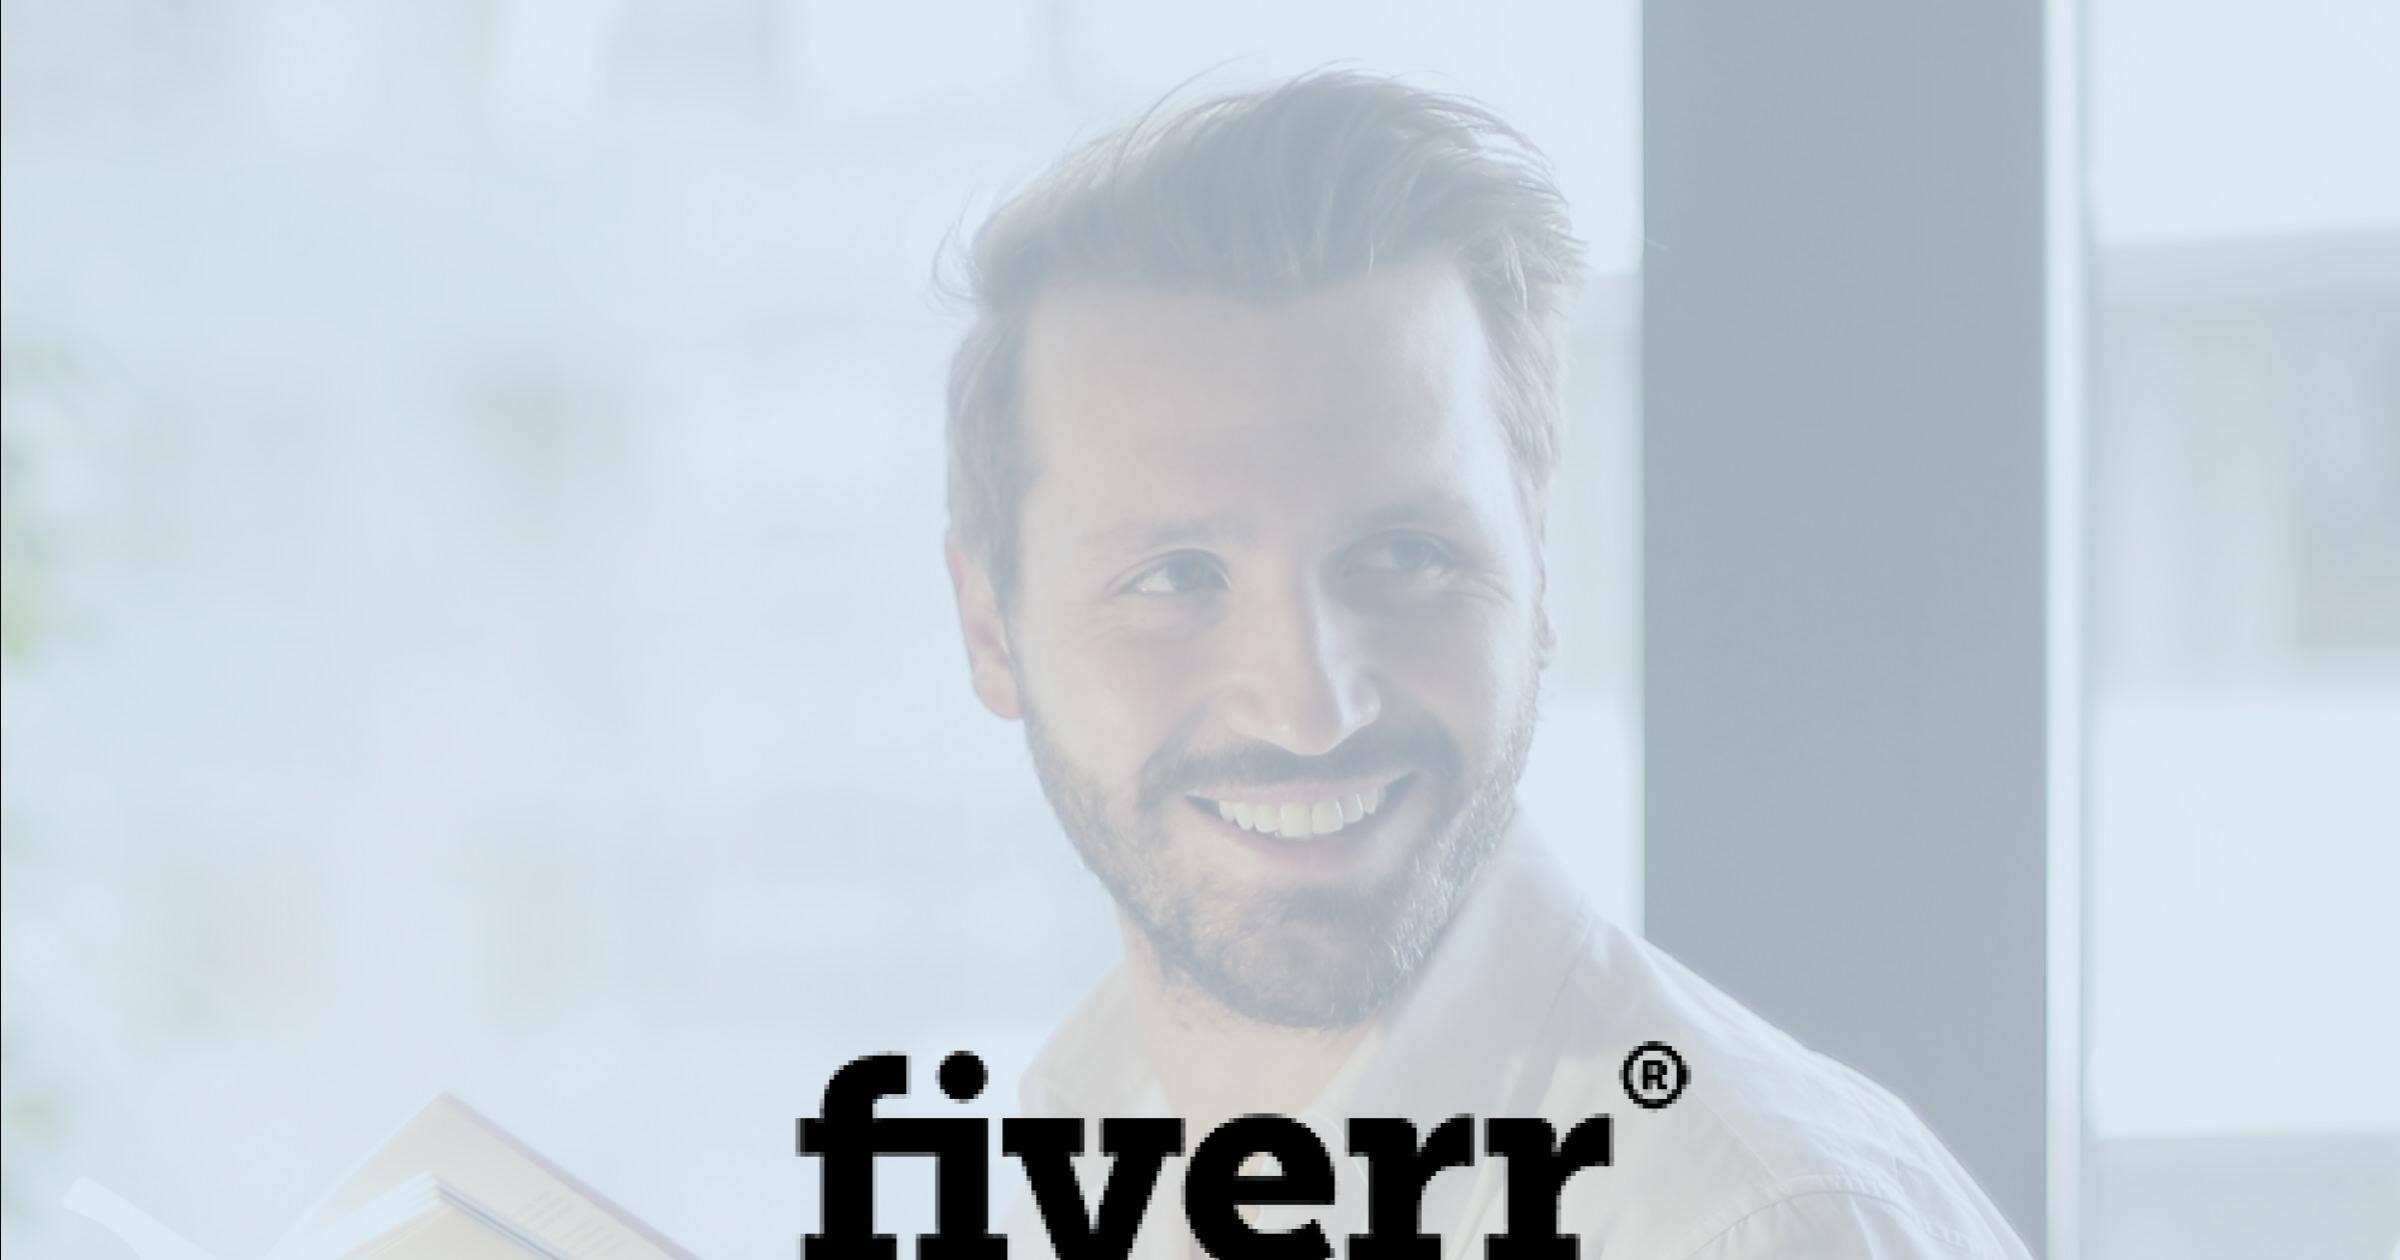 Fiverr vs Freelancer [2021]: Which Should You Use? - The Digital Merchant